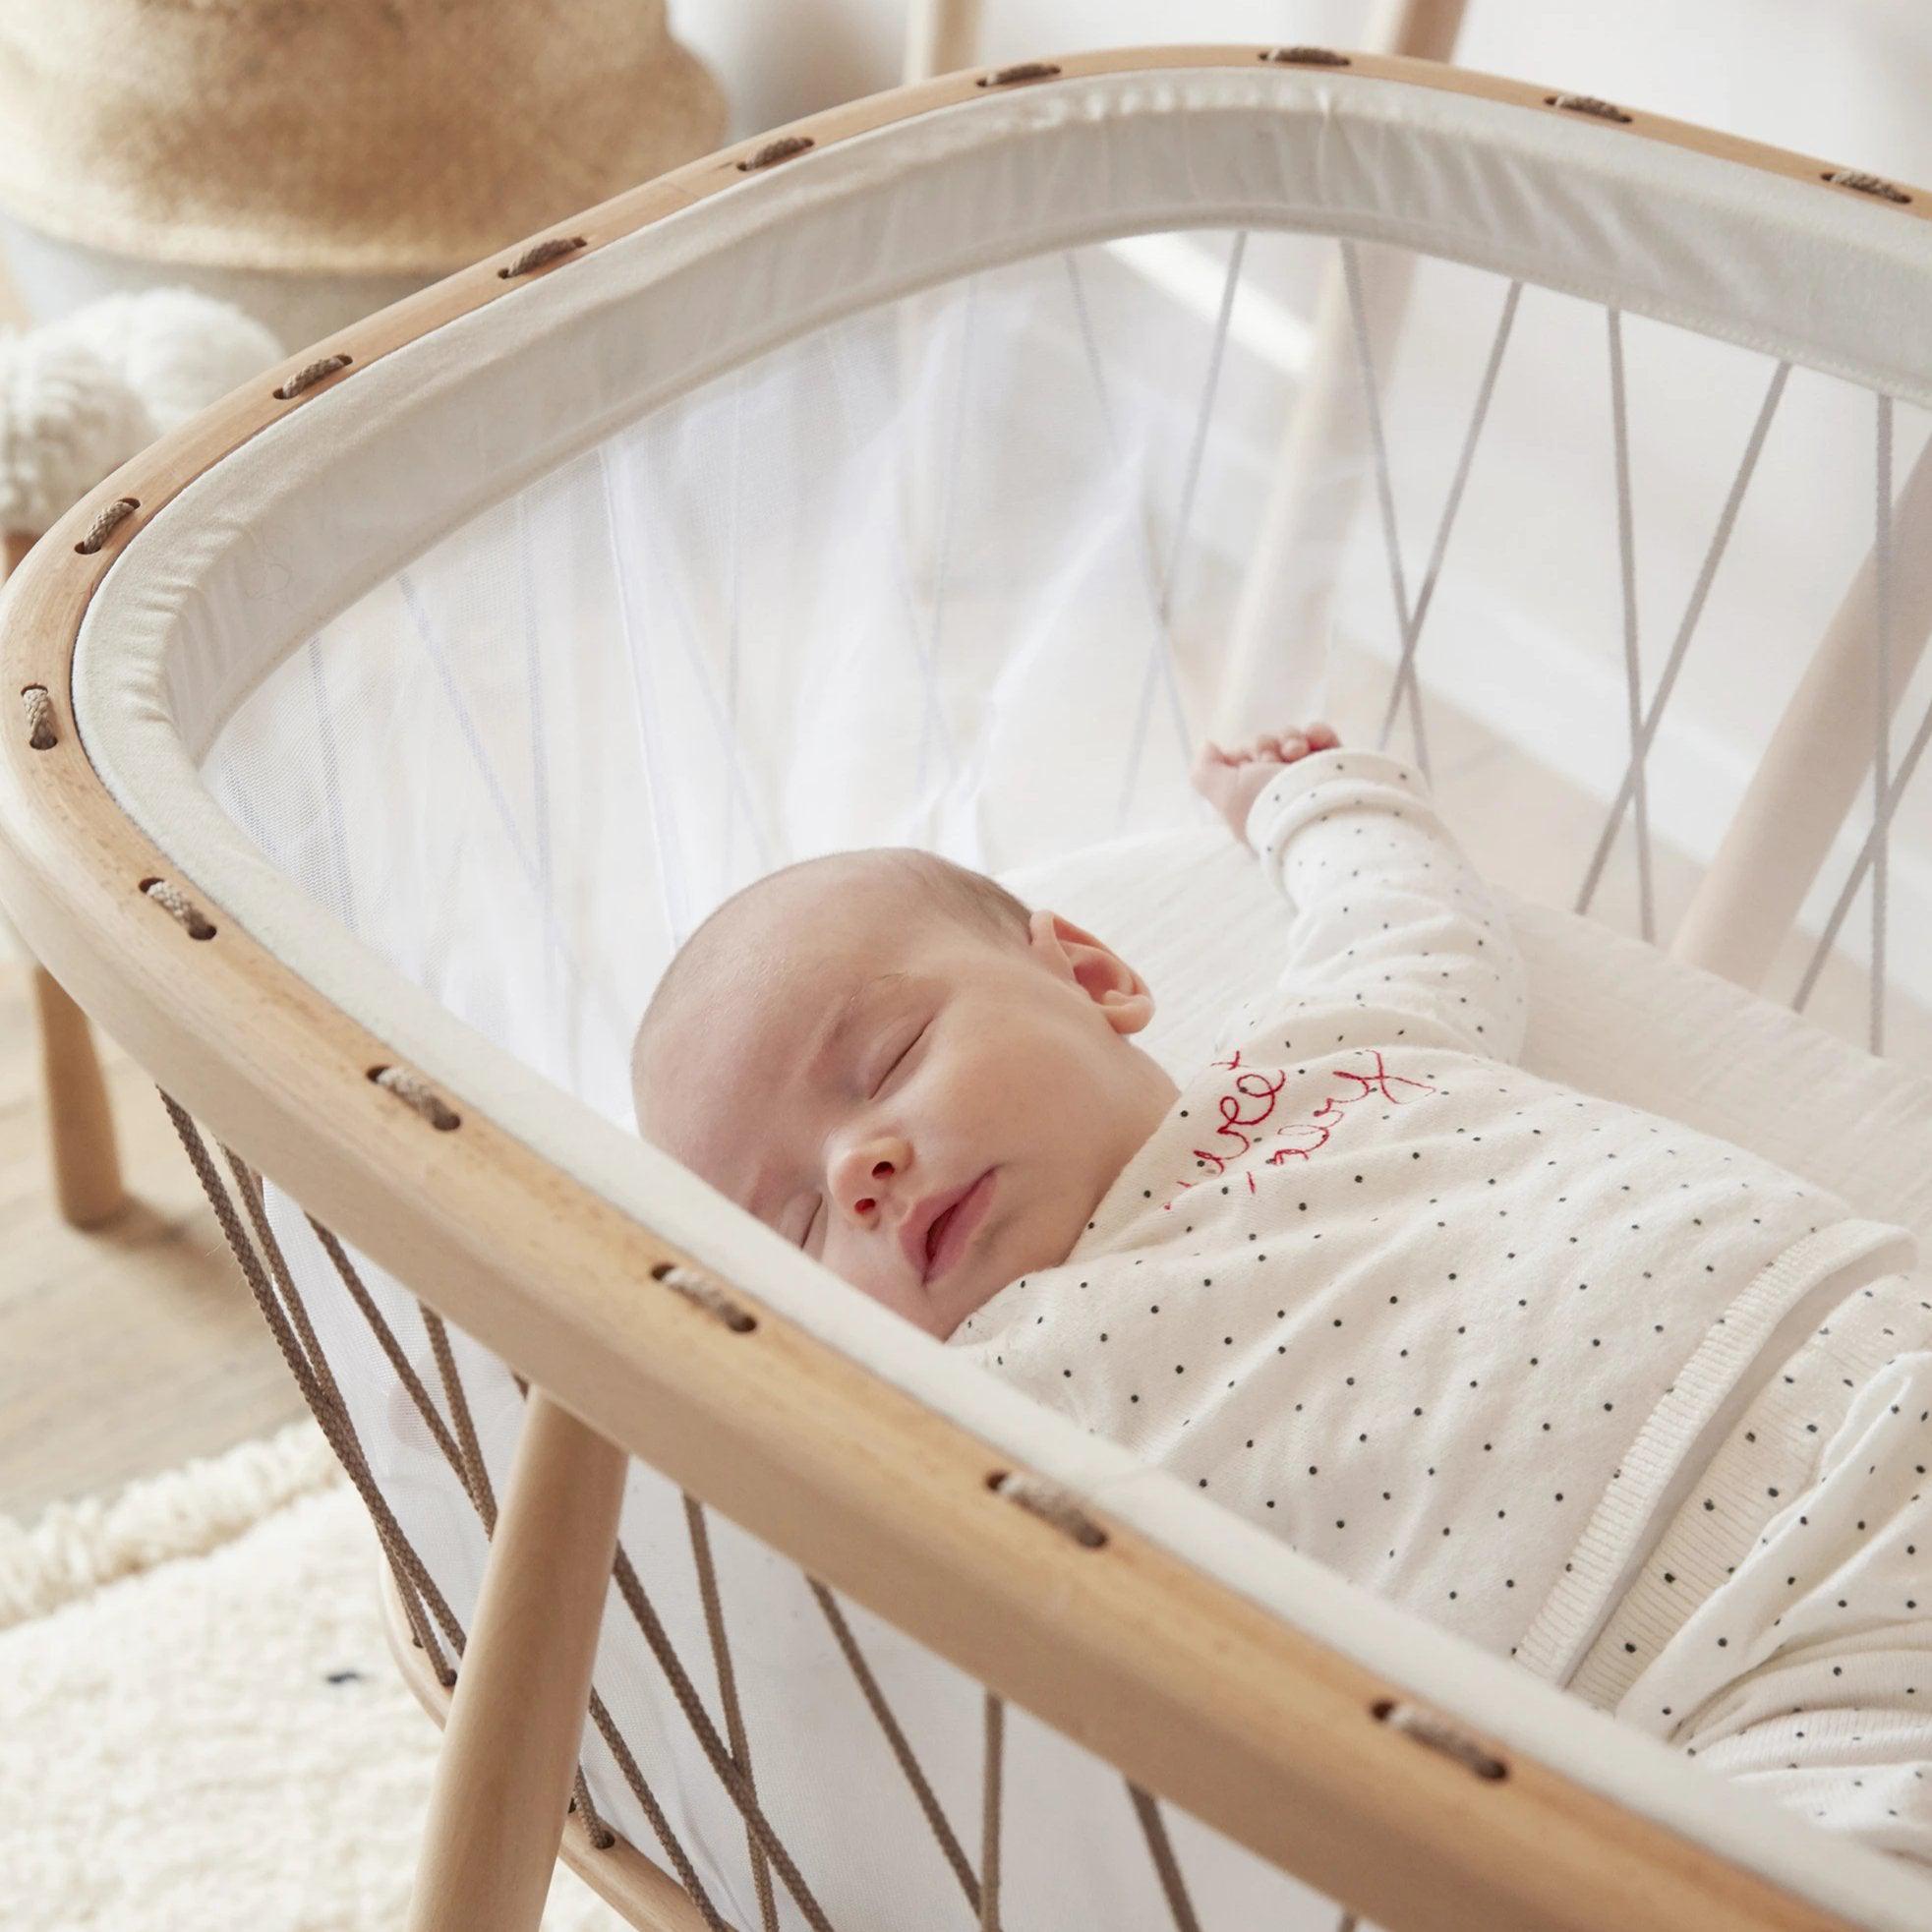 The design of the KUMI combines tradition and modernity. It retains the millenary lateral swing, a delicate movement that helps babies fall asleep, while sketching minimalist and contemporary lines, thanks in particular to the laces that surround it, which gives it both lightness and safety.